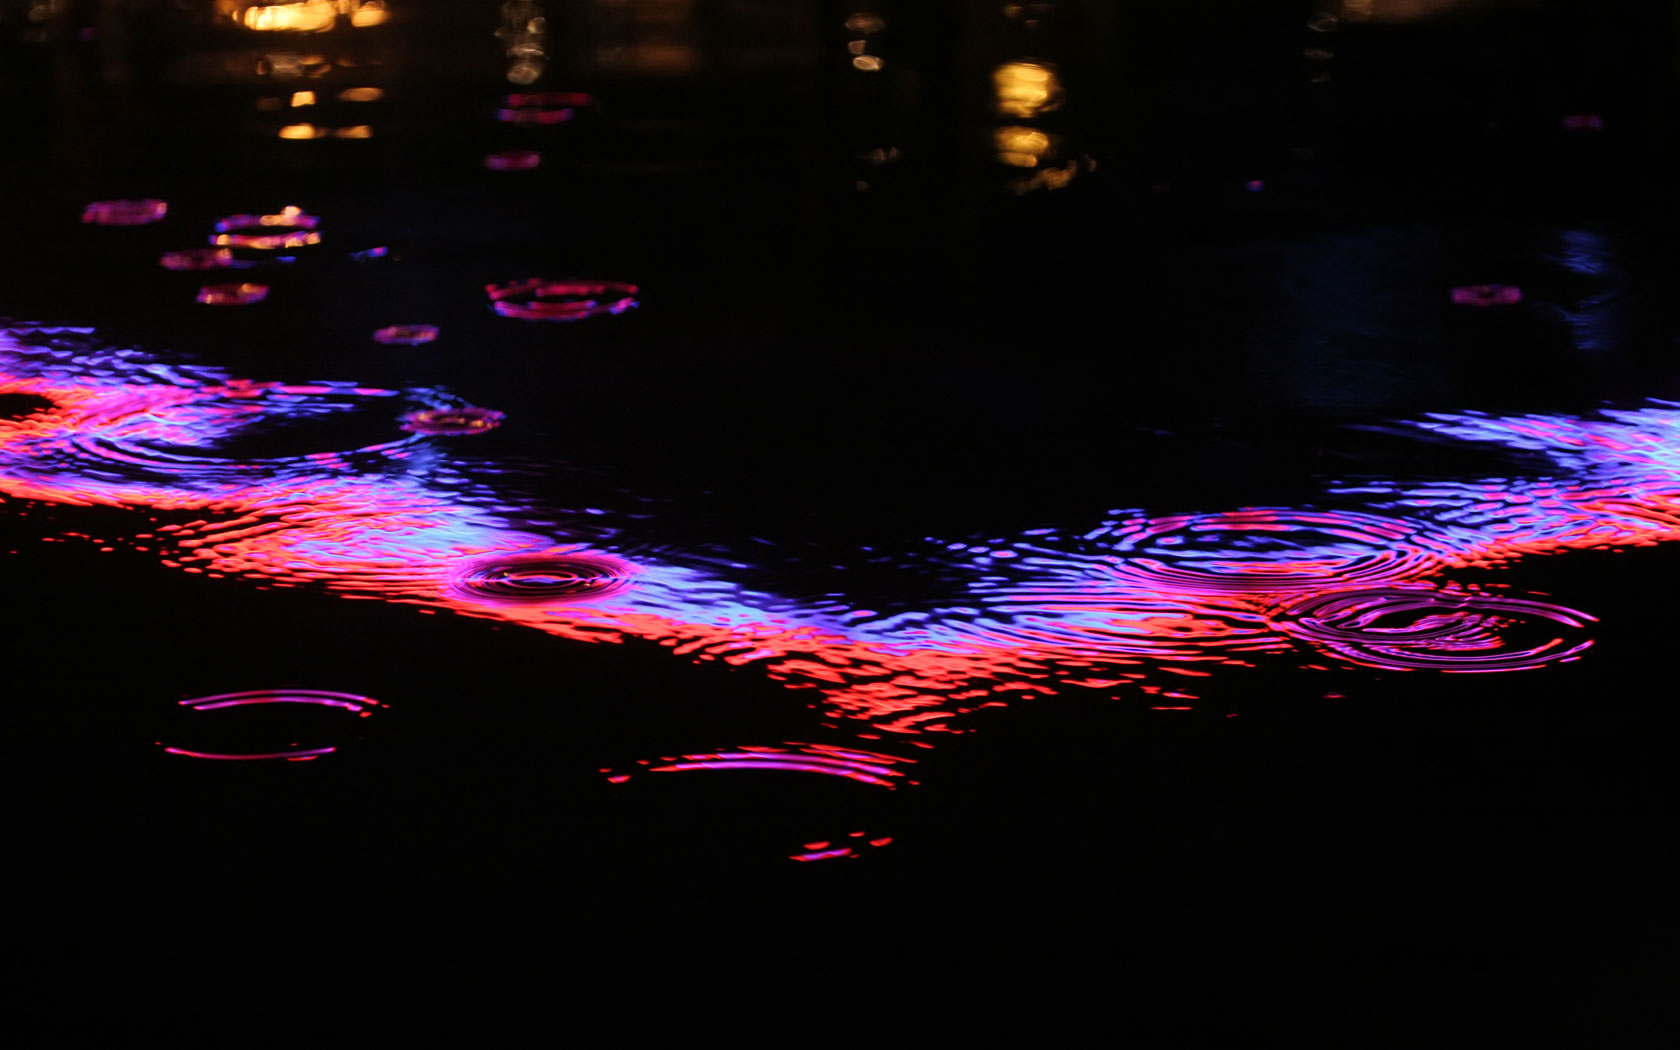 Water Neon Wallpaper Image Is High Definition You